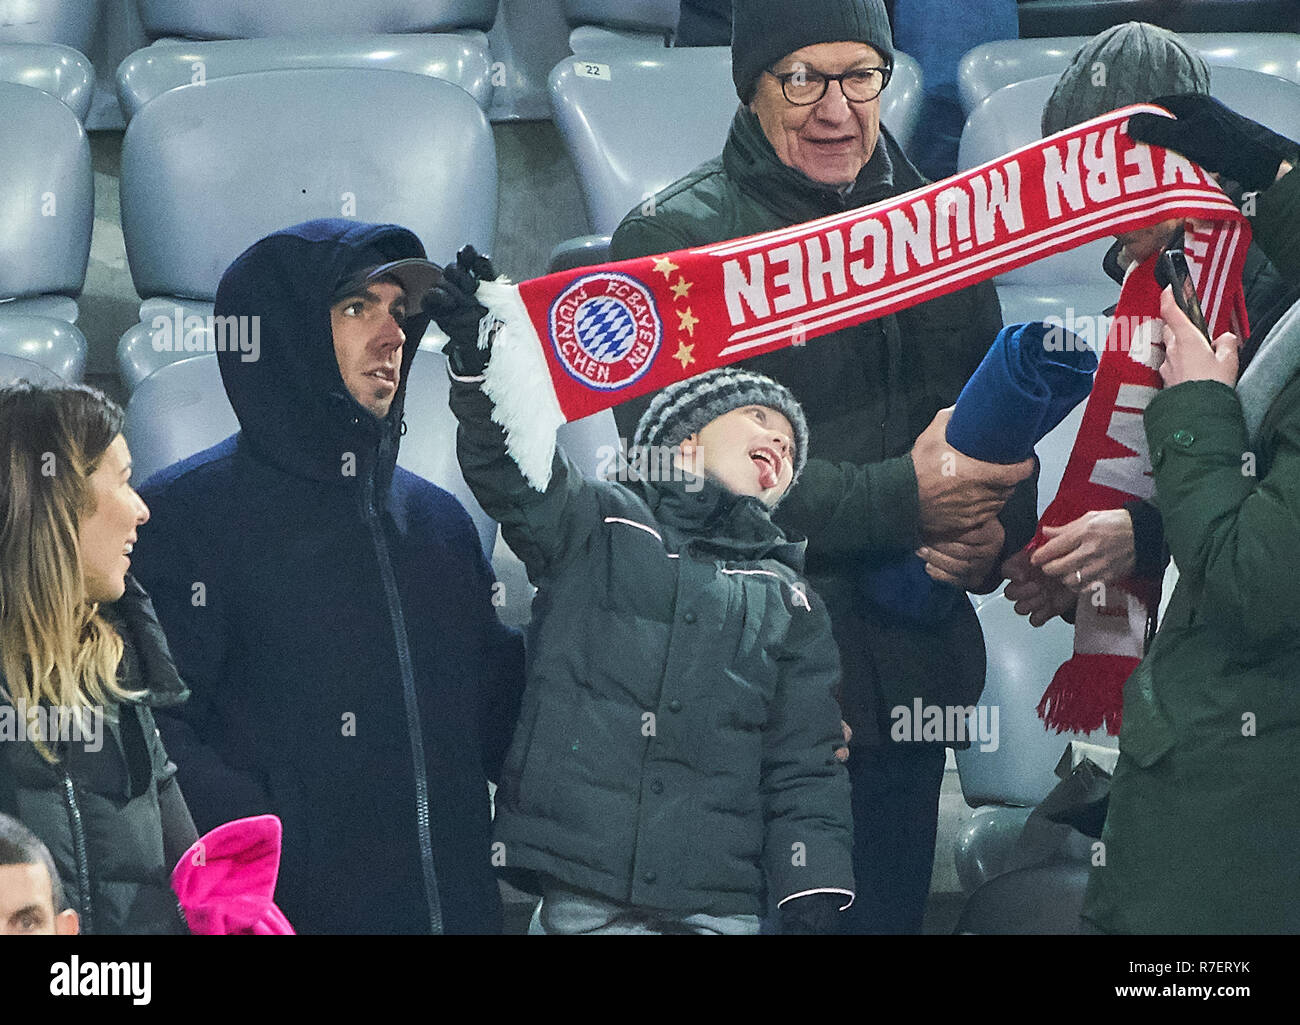 Munich, Germany. 8th December 2018. former FCB player, DFB captain Philipp LAHM with son Julian  FC BAYERN MUNICH - 1.FC NUREMBERG 3-0  - DFL REGULATIONS PROHIBIT ANY USE OF PHOTOGRAPHS as IMAGE SEQUENCES and/or QUASI-VIDEO -  1.German Soccer League , Munich, December 08, 2018  Season 2018/2019, matchday 14, FCB, 1.FC Nürnberg © Peter Schatz / Alamy Live News Stock Photo